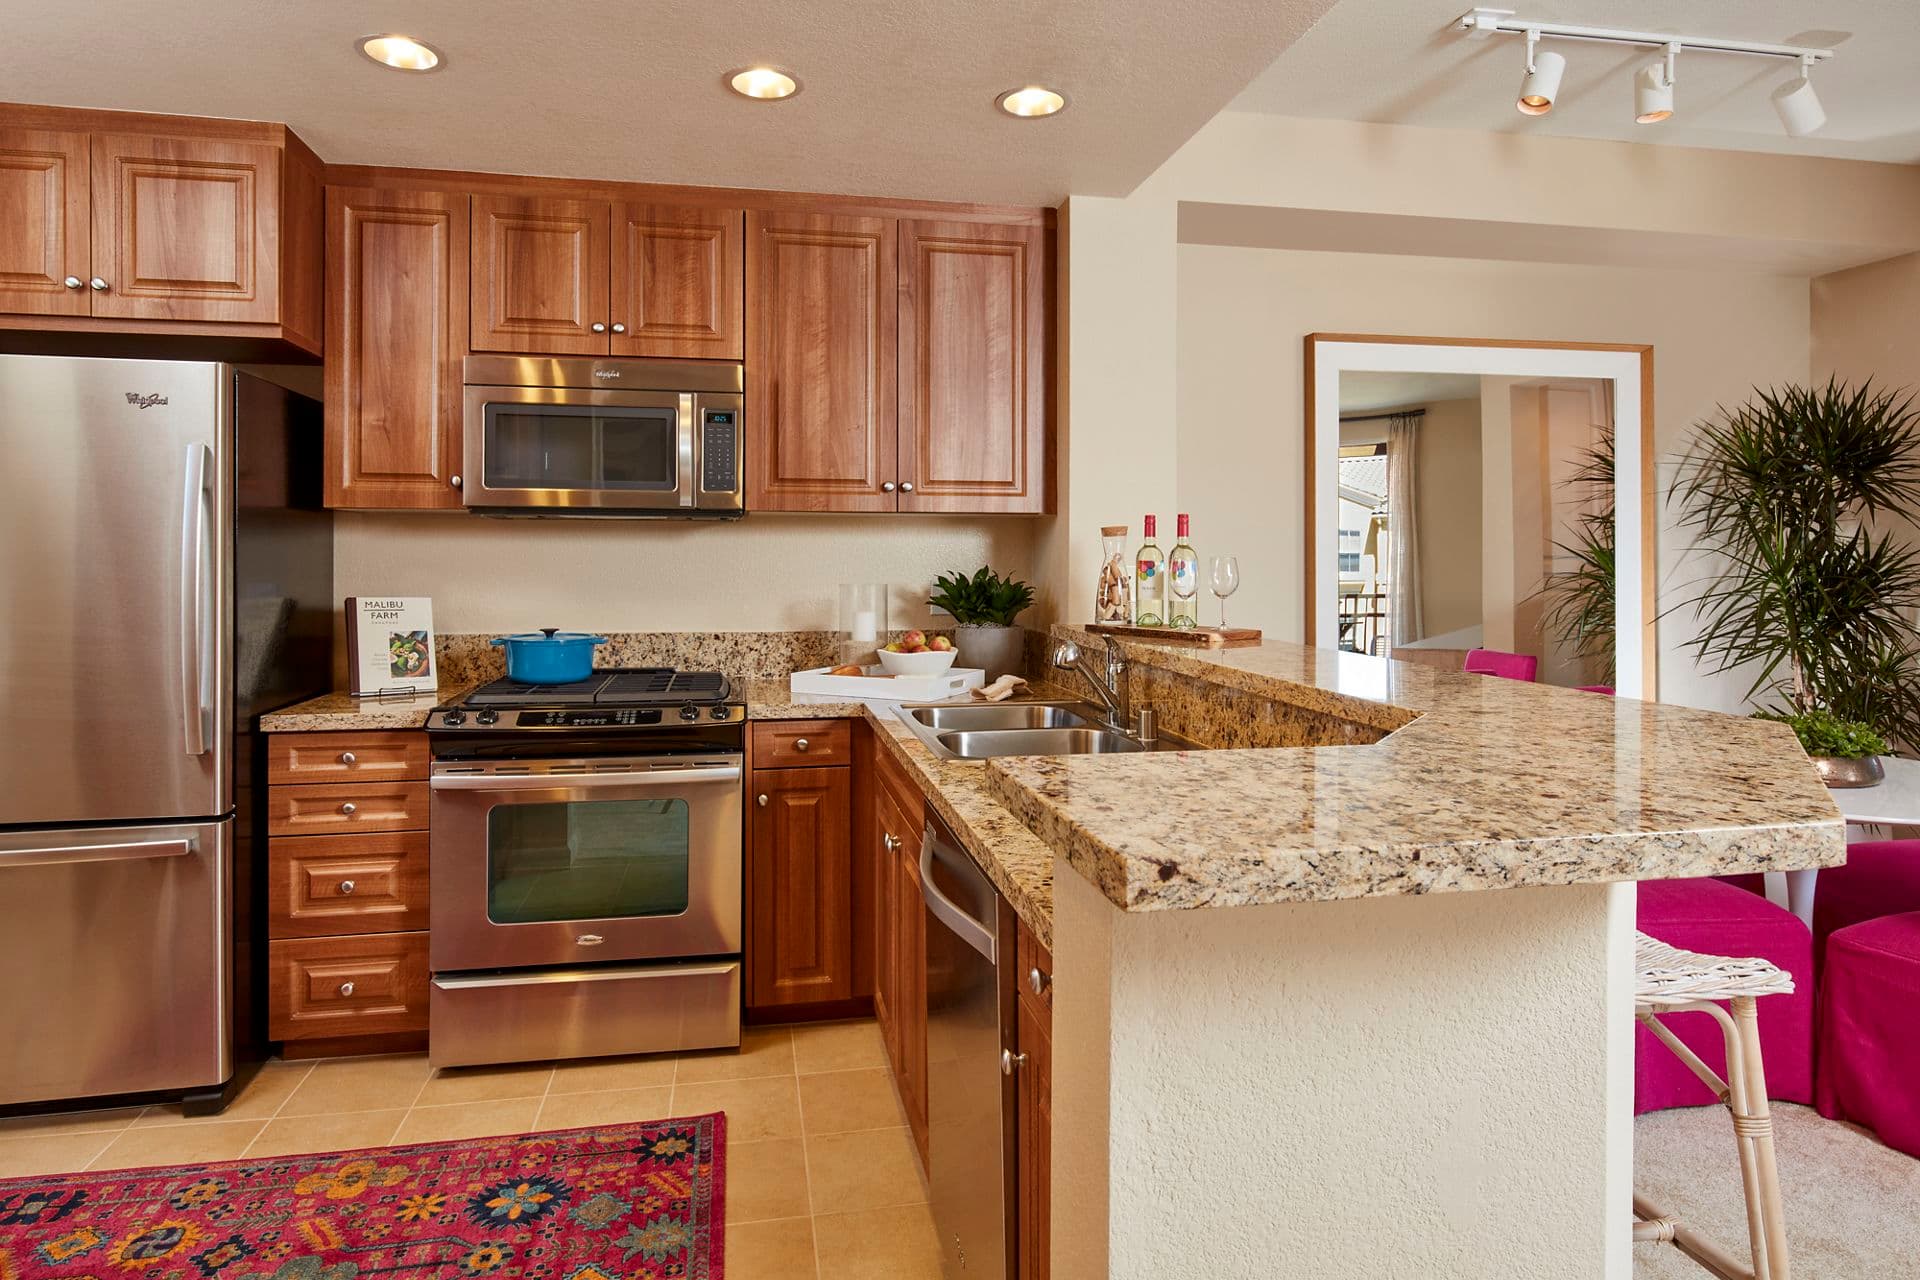 Interior view of kitchen at Cherry Orchard Apartment Homes in Sunnyvale, CA.